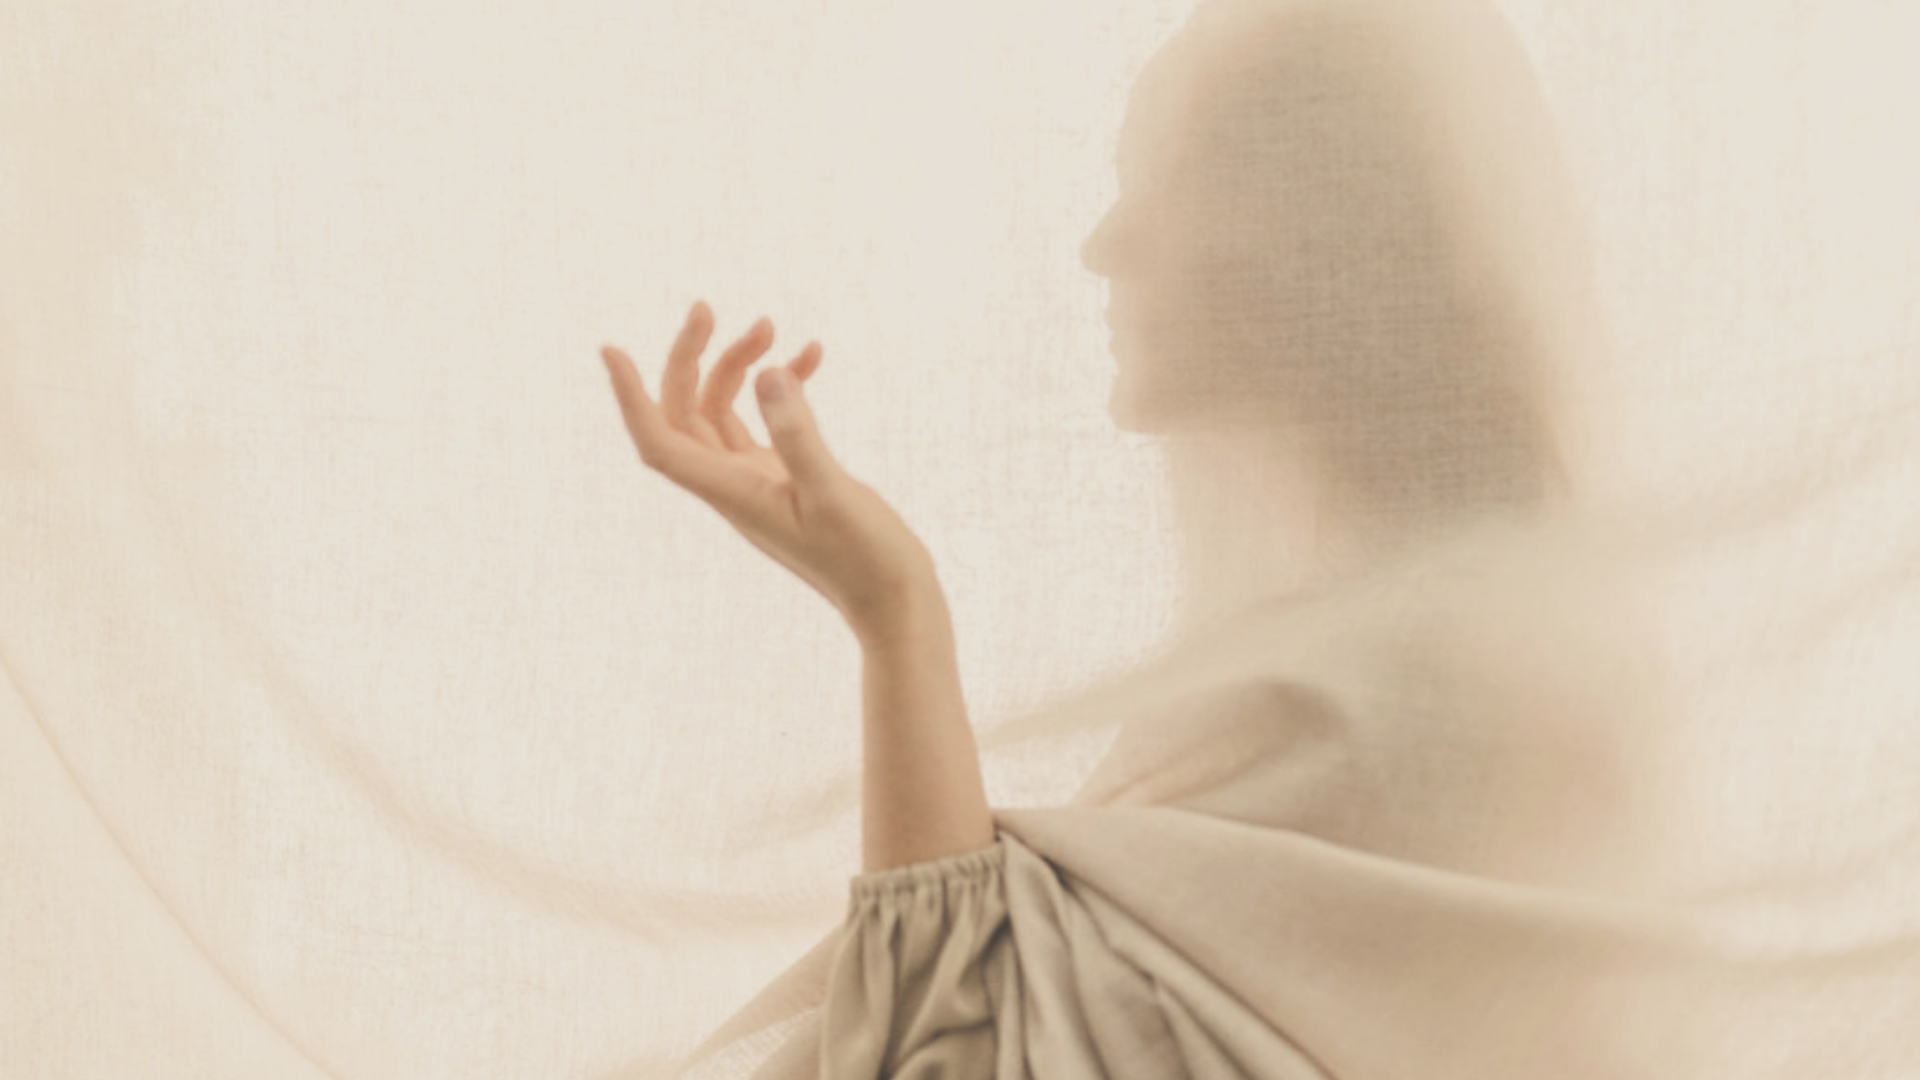 woman behind beige curtains holding her hand in a receiving way